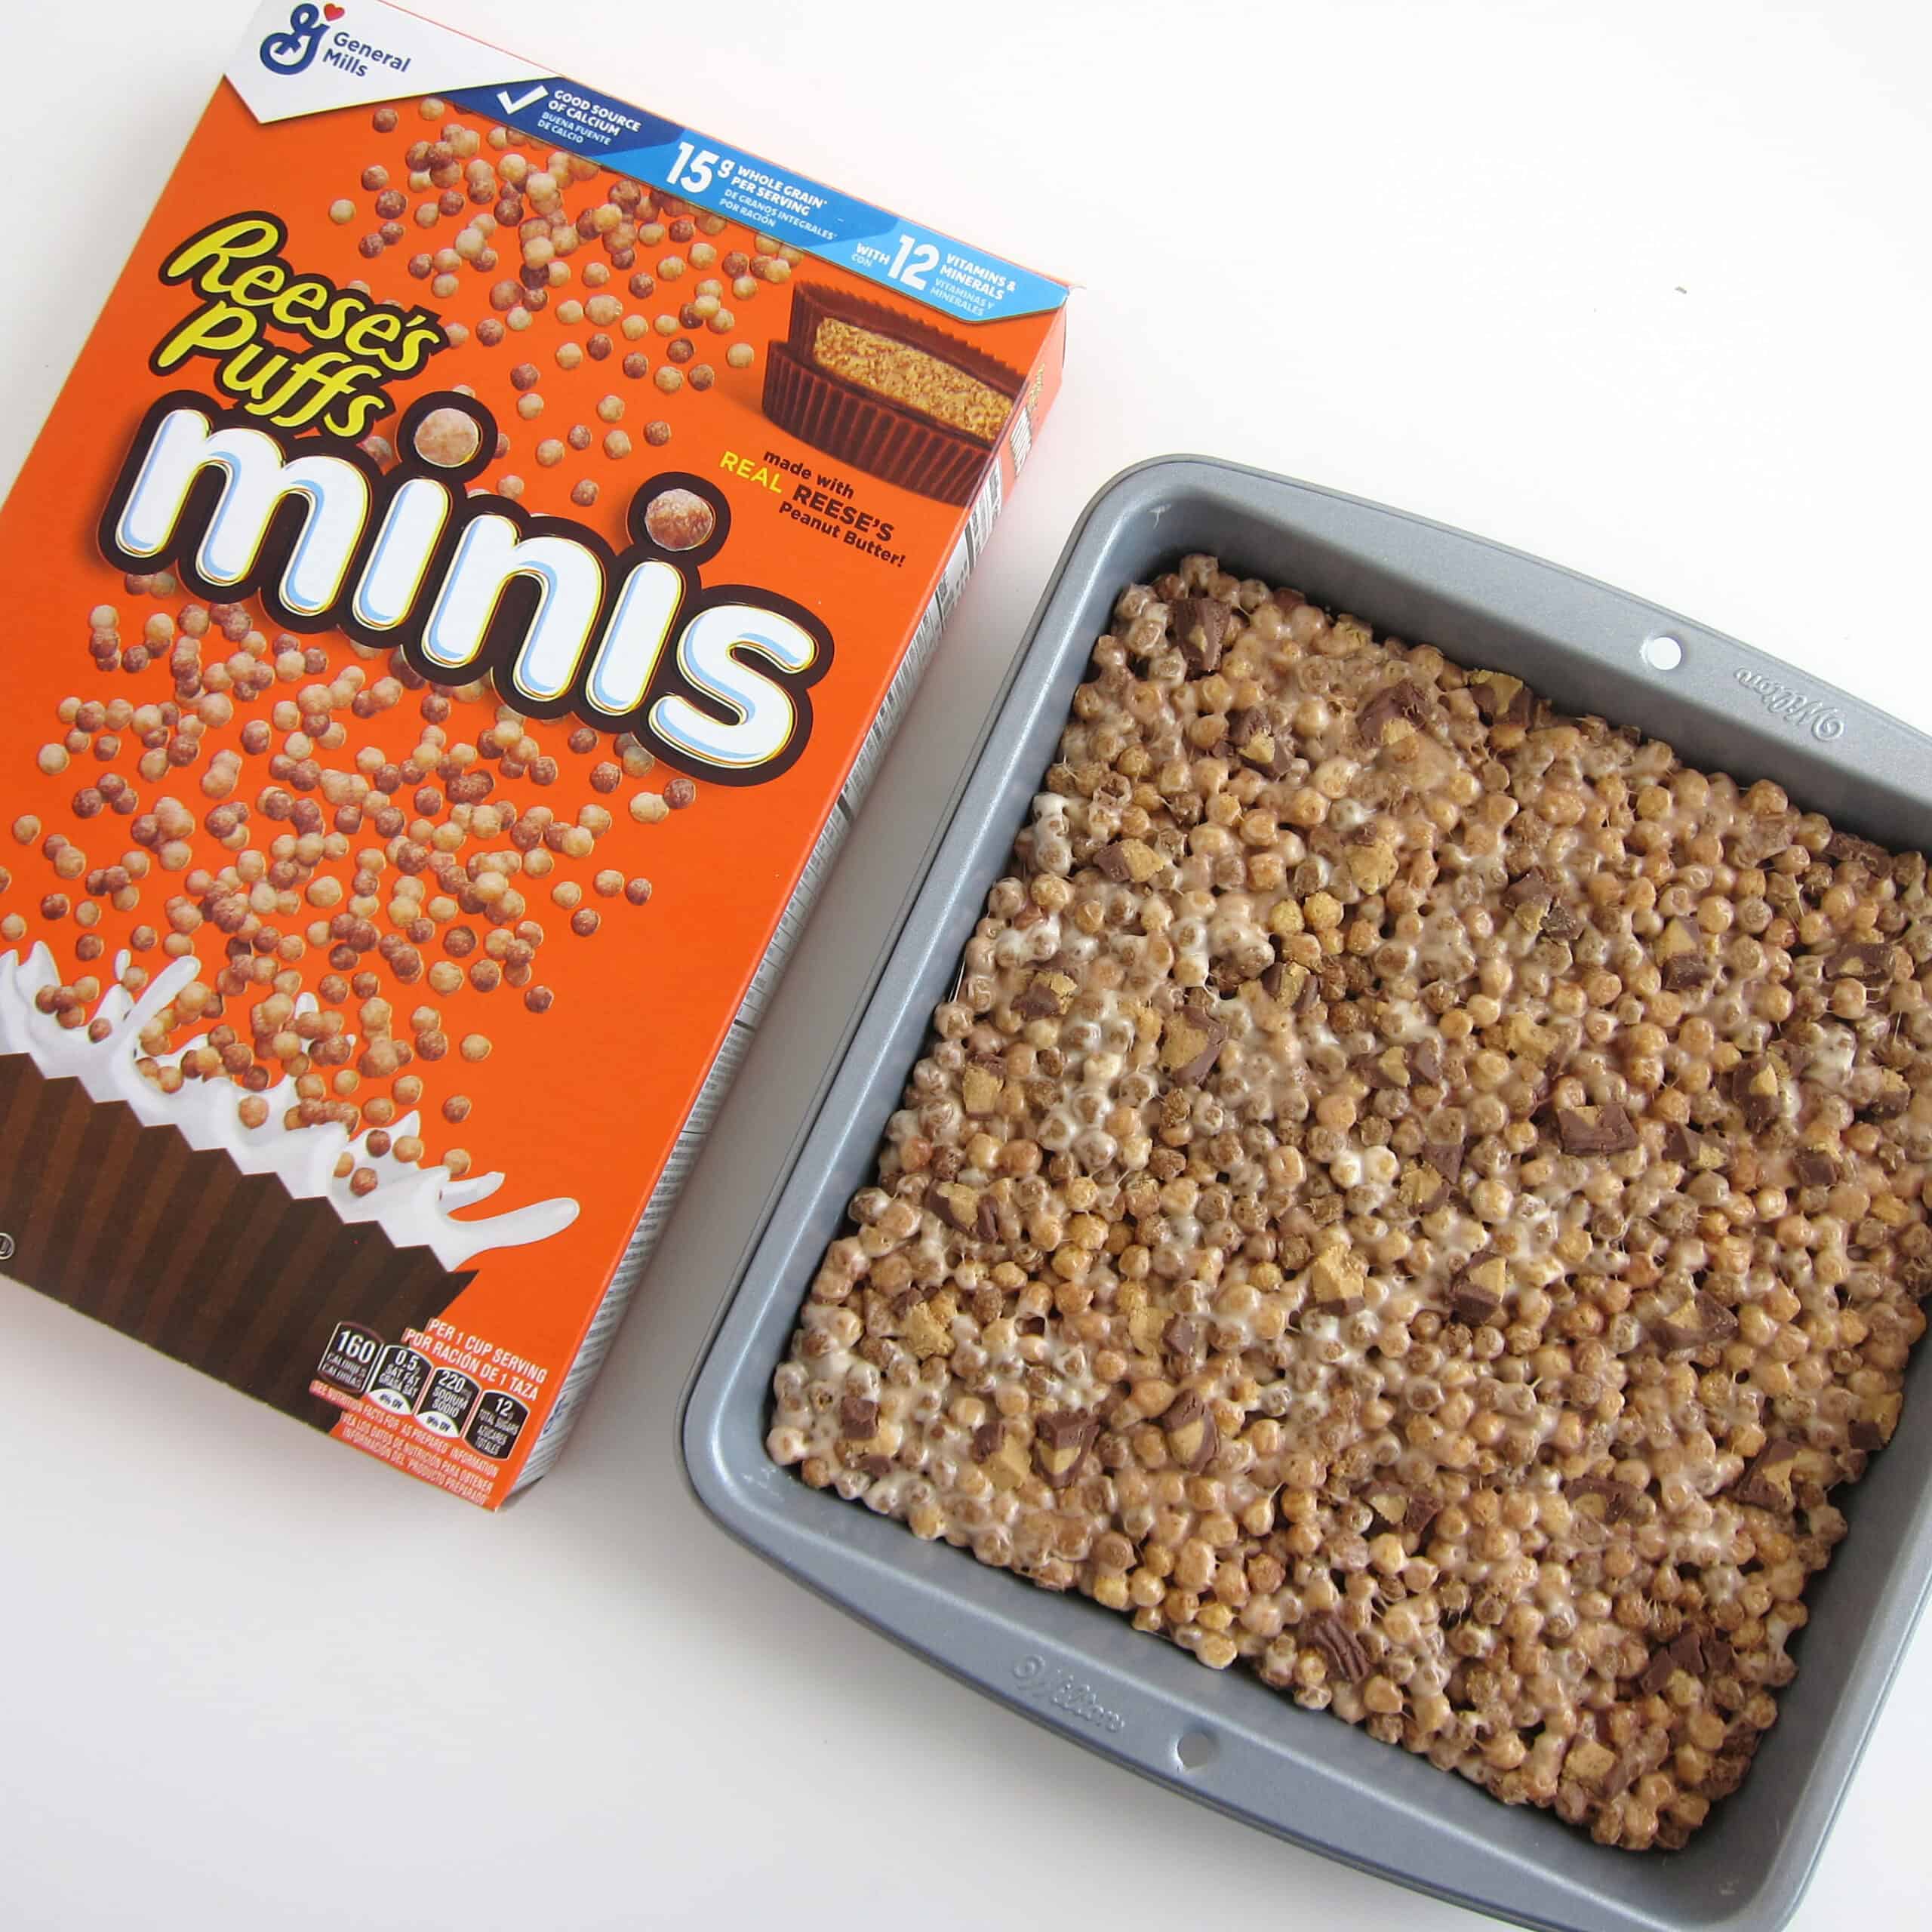 Reese's Puffs Minis Cereal Treats in a baking pan set next to a box of Reese's Puffs Minis cereal.